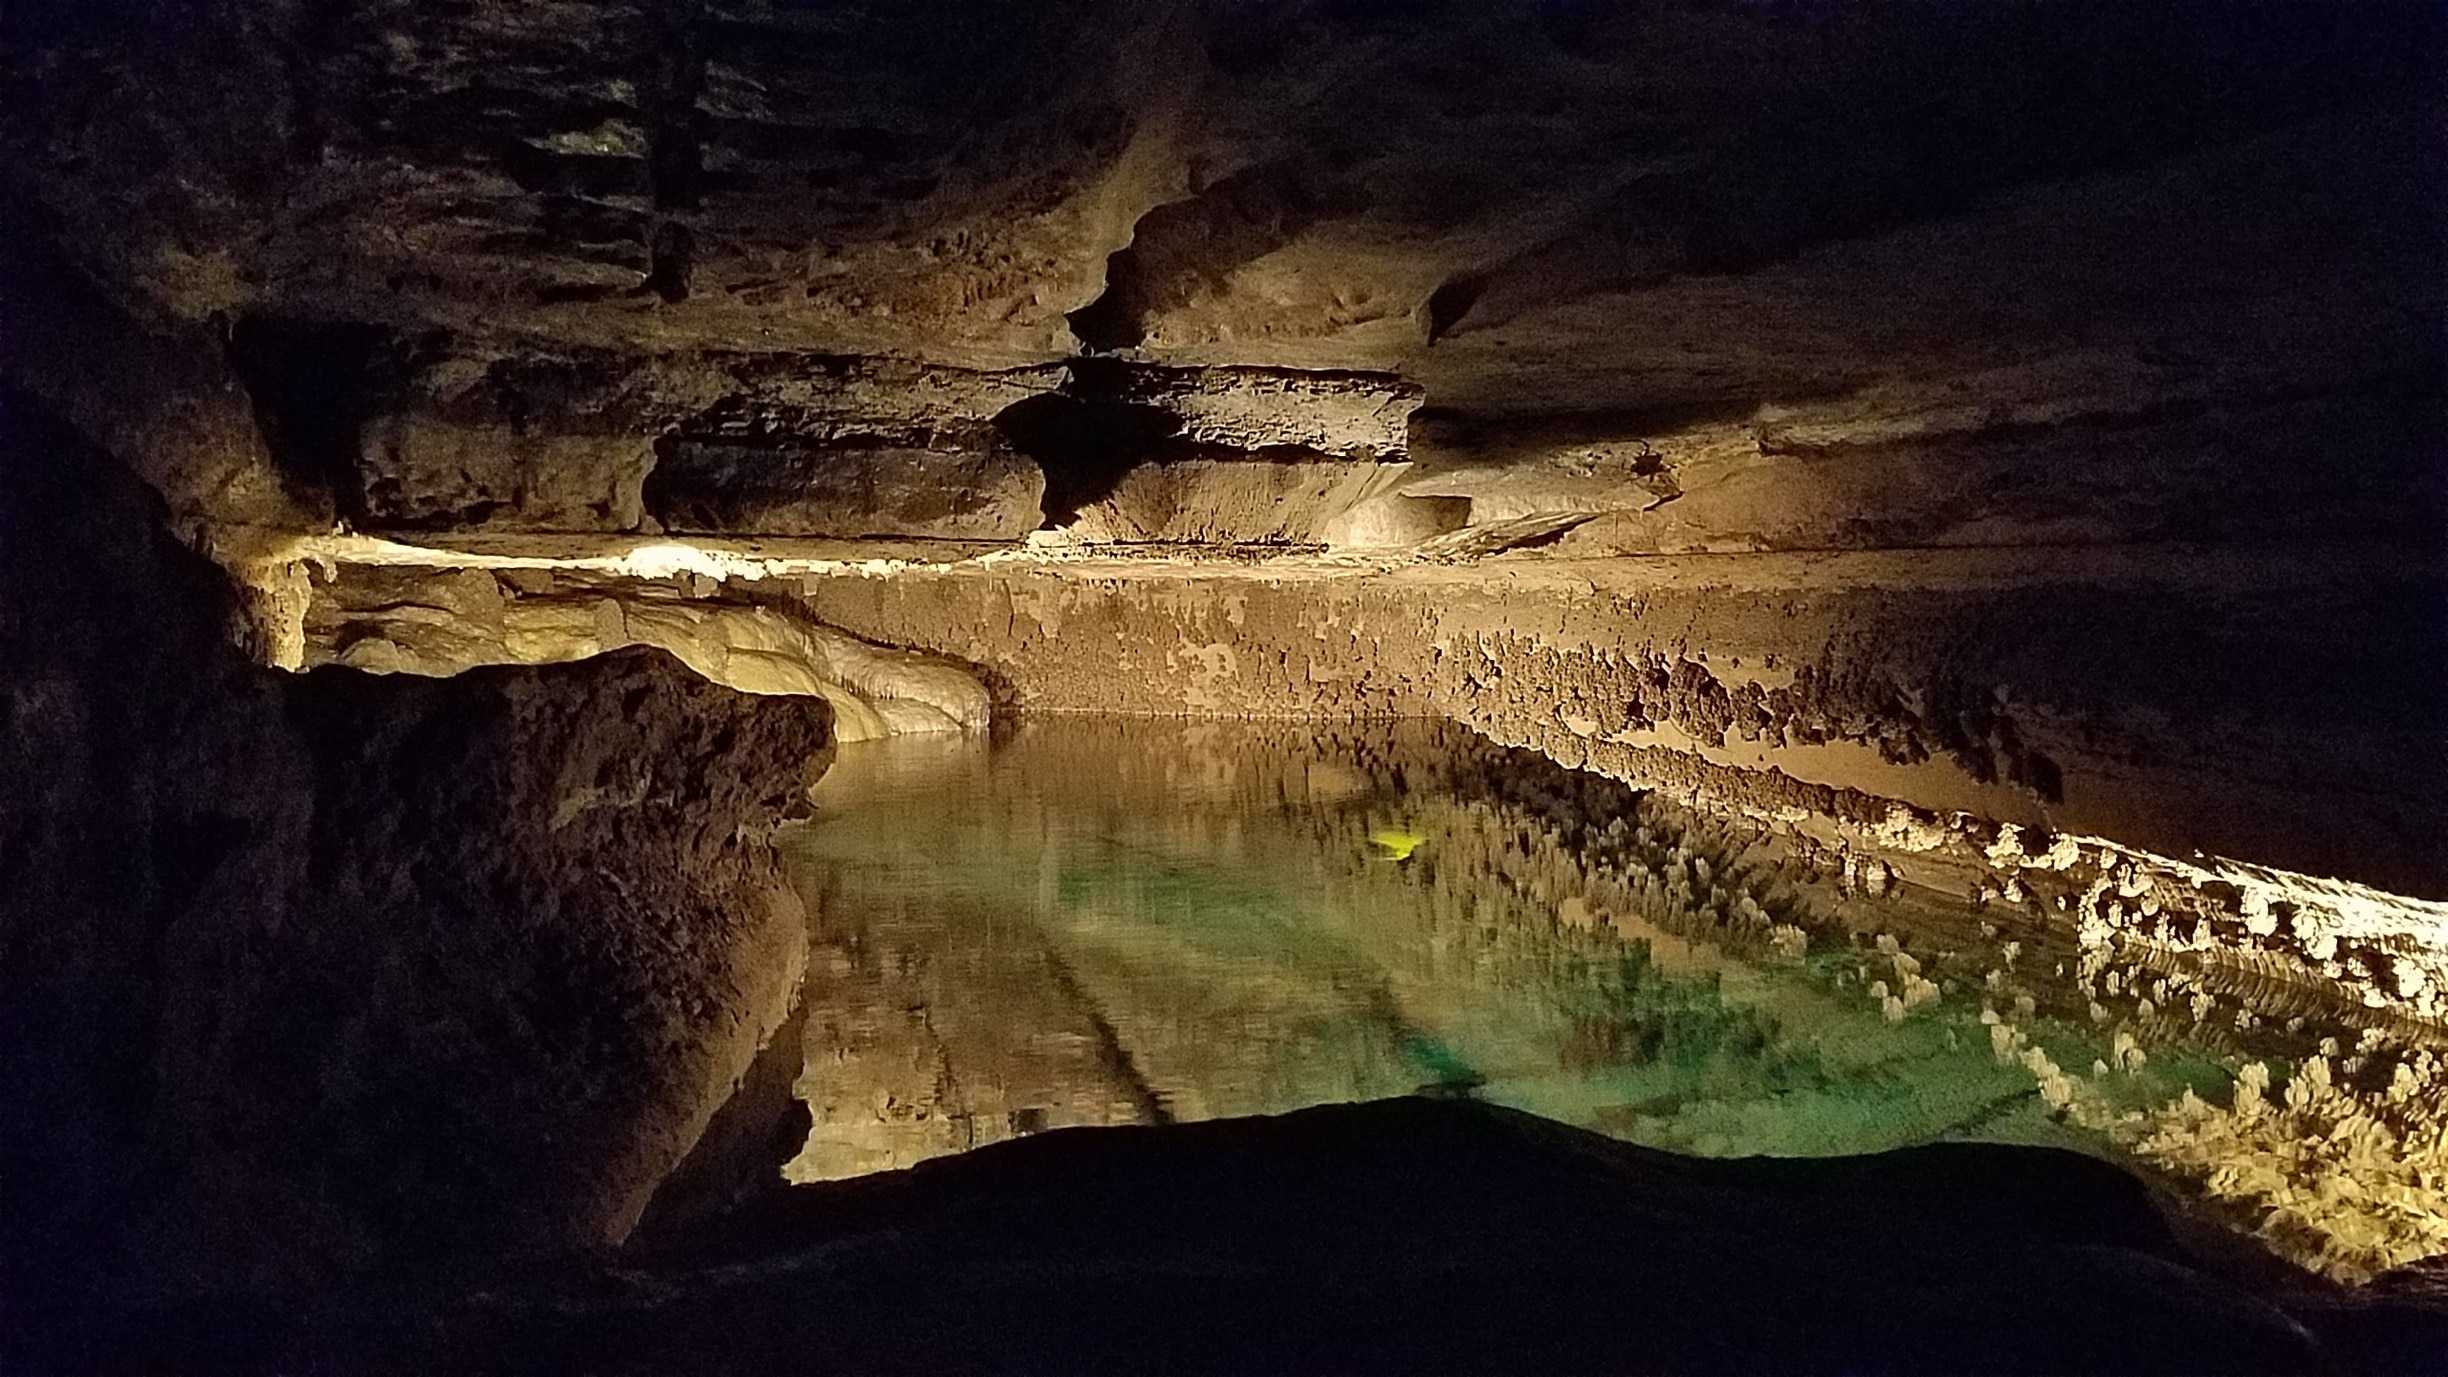 Guided tours are offered at Mystery Cave where we came upon this little body of water down in the cave. It was very cool!! The water was so clear and beautiful!! #InStone 